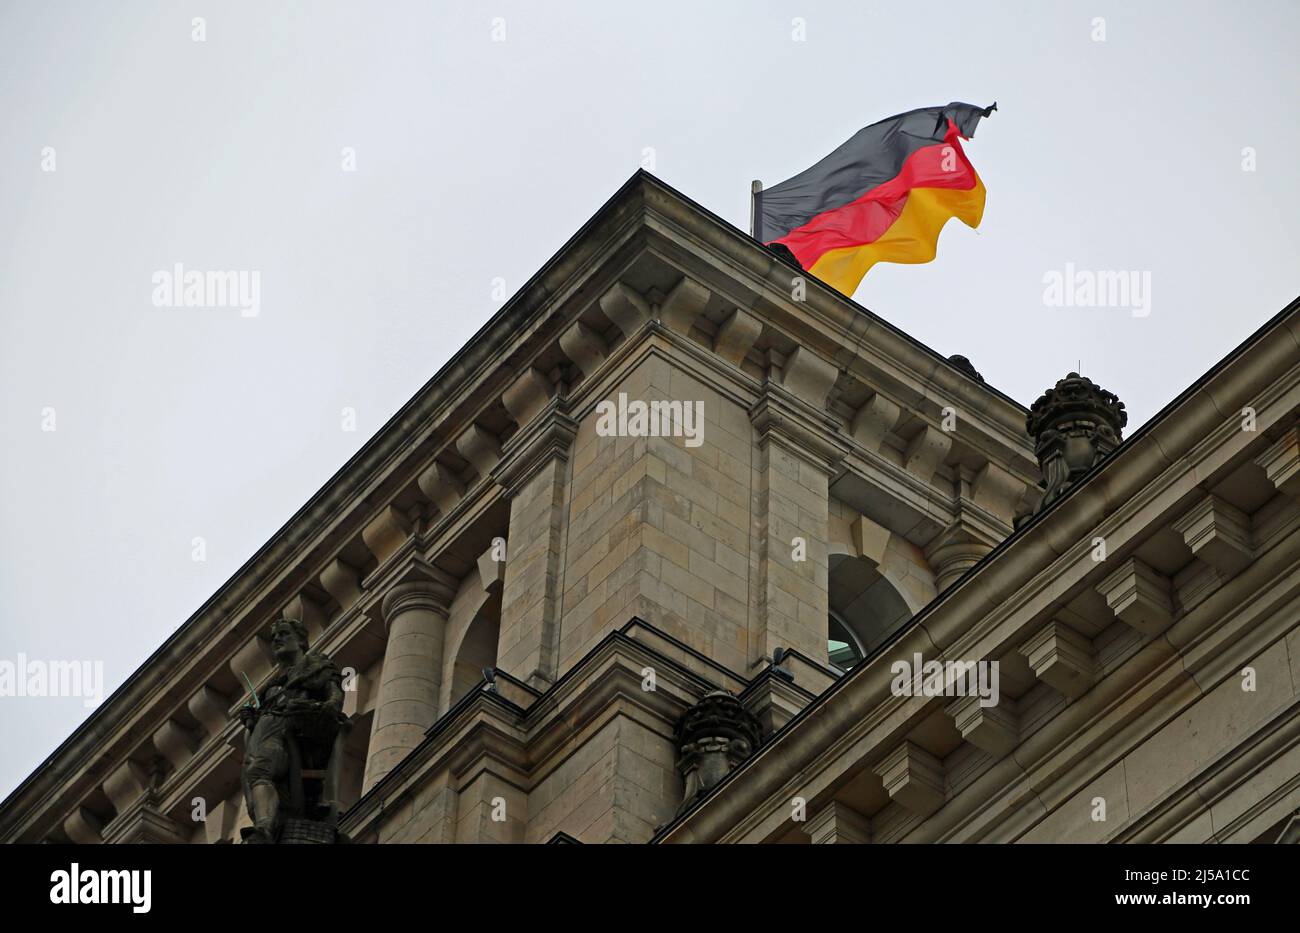 Part of the Reichstag with German flag - Berlin, Germany Stock Photo